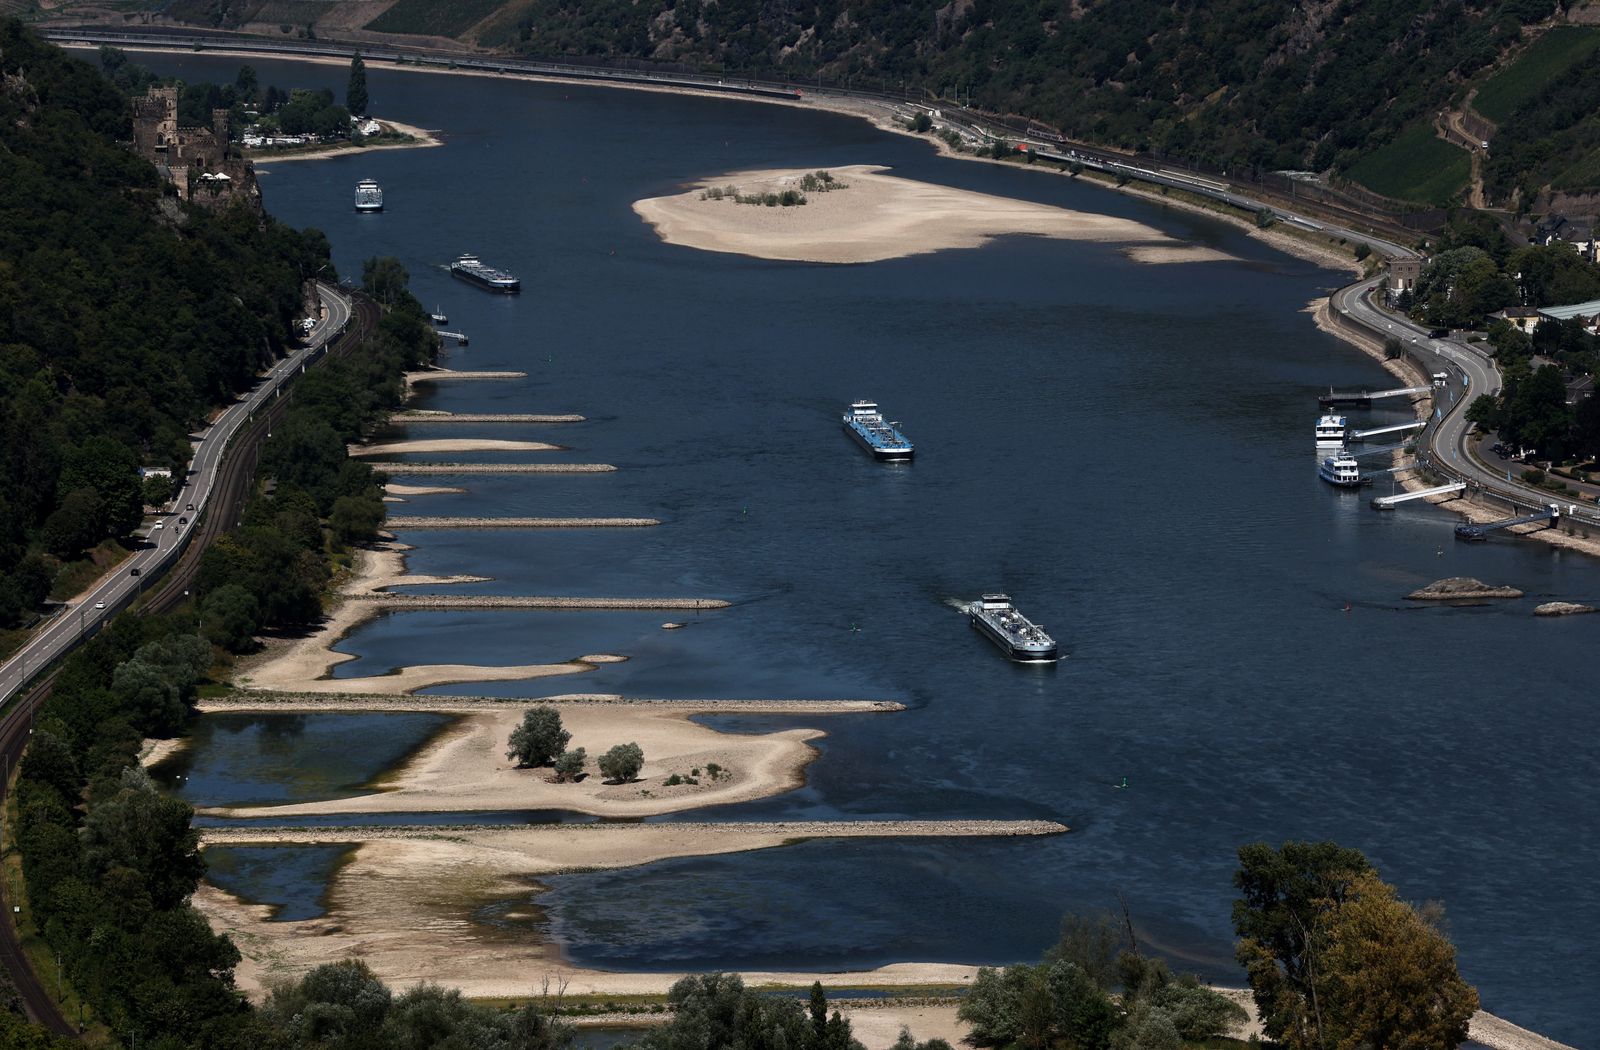 Drought means low water levels in Rhine and a headache for international shipping - REUTERS